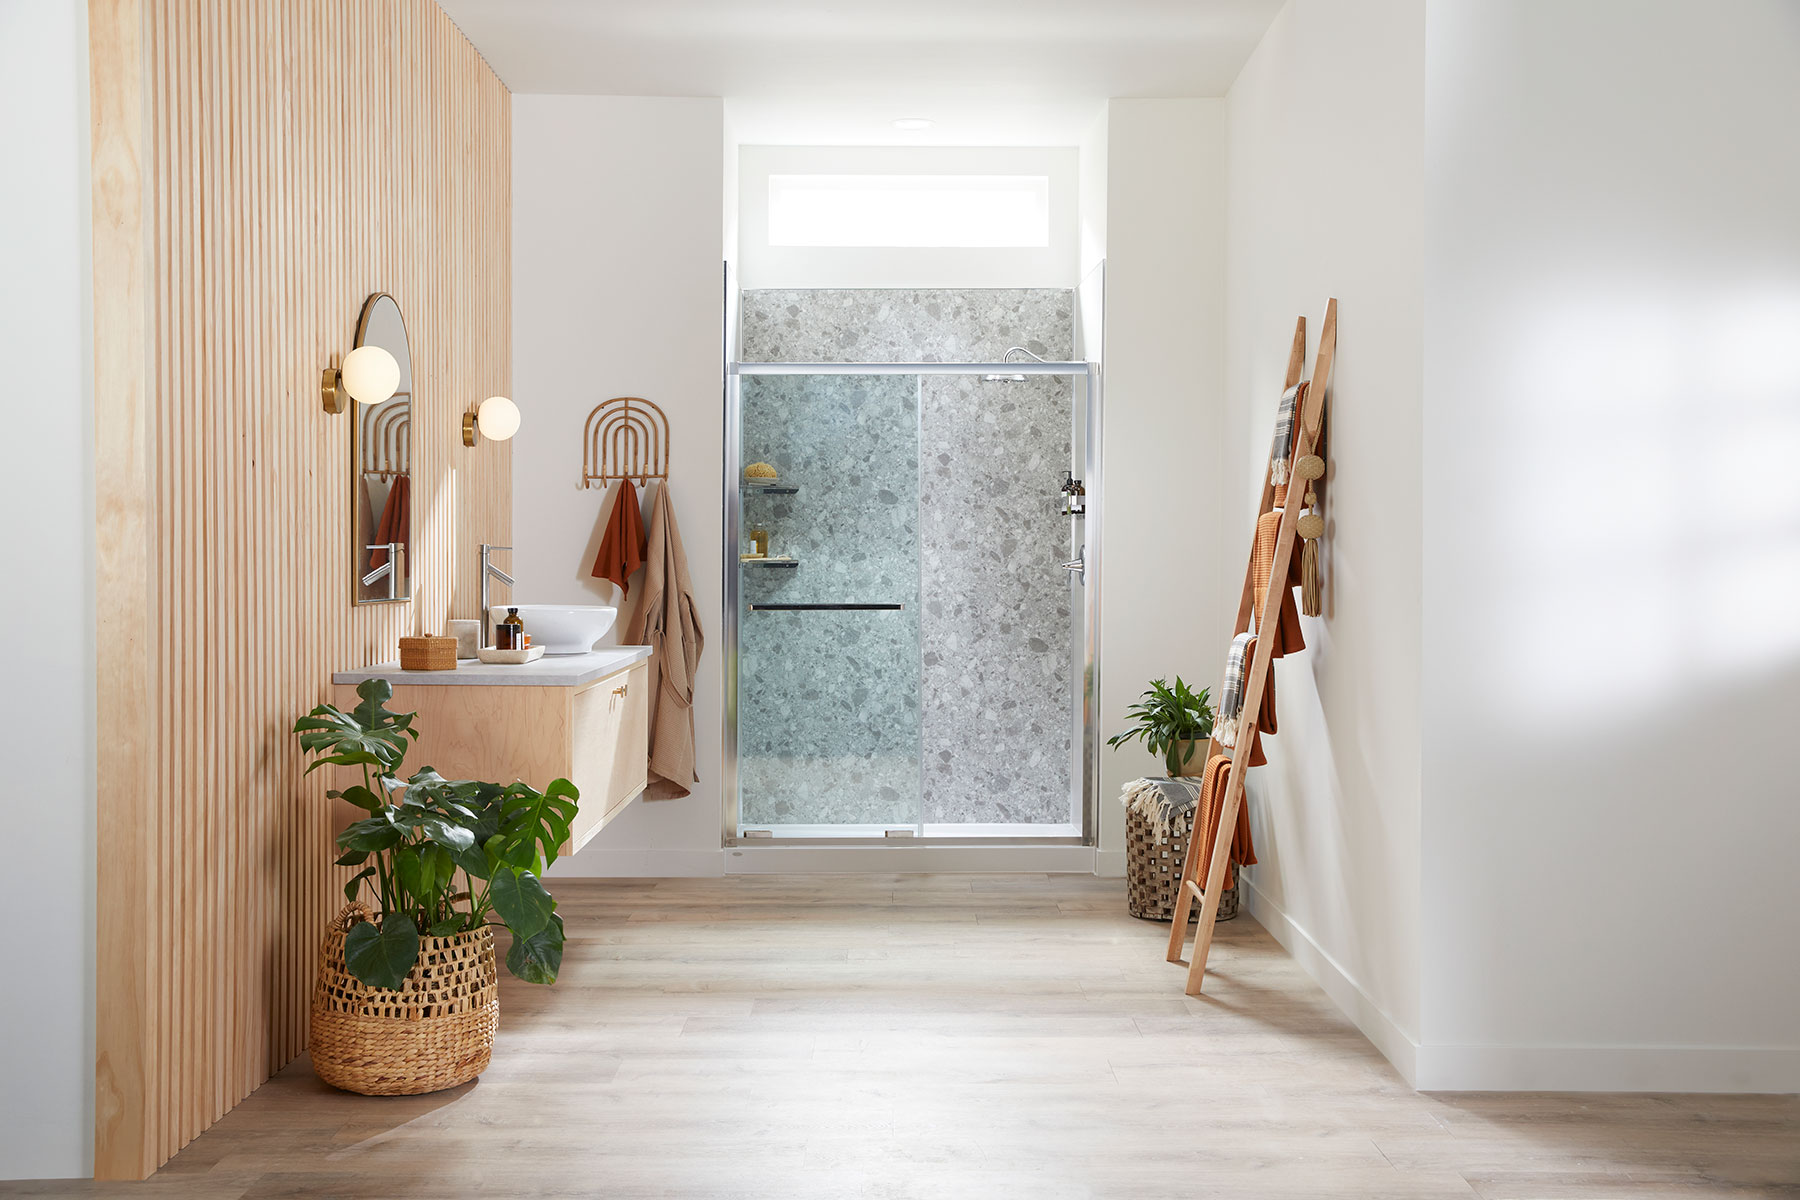 Tips For A Bathroom Remodel Before The Holidays